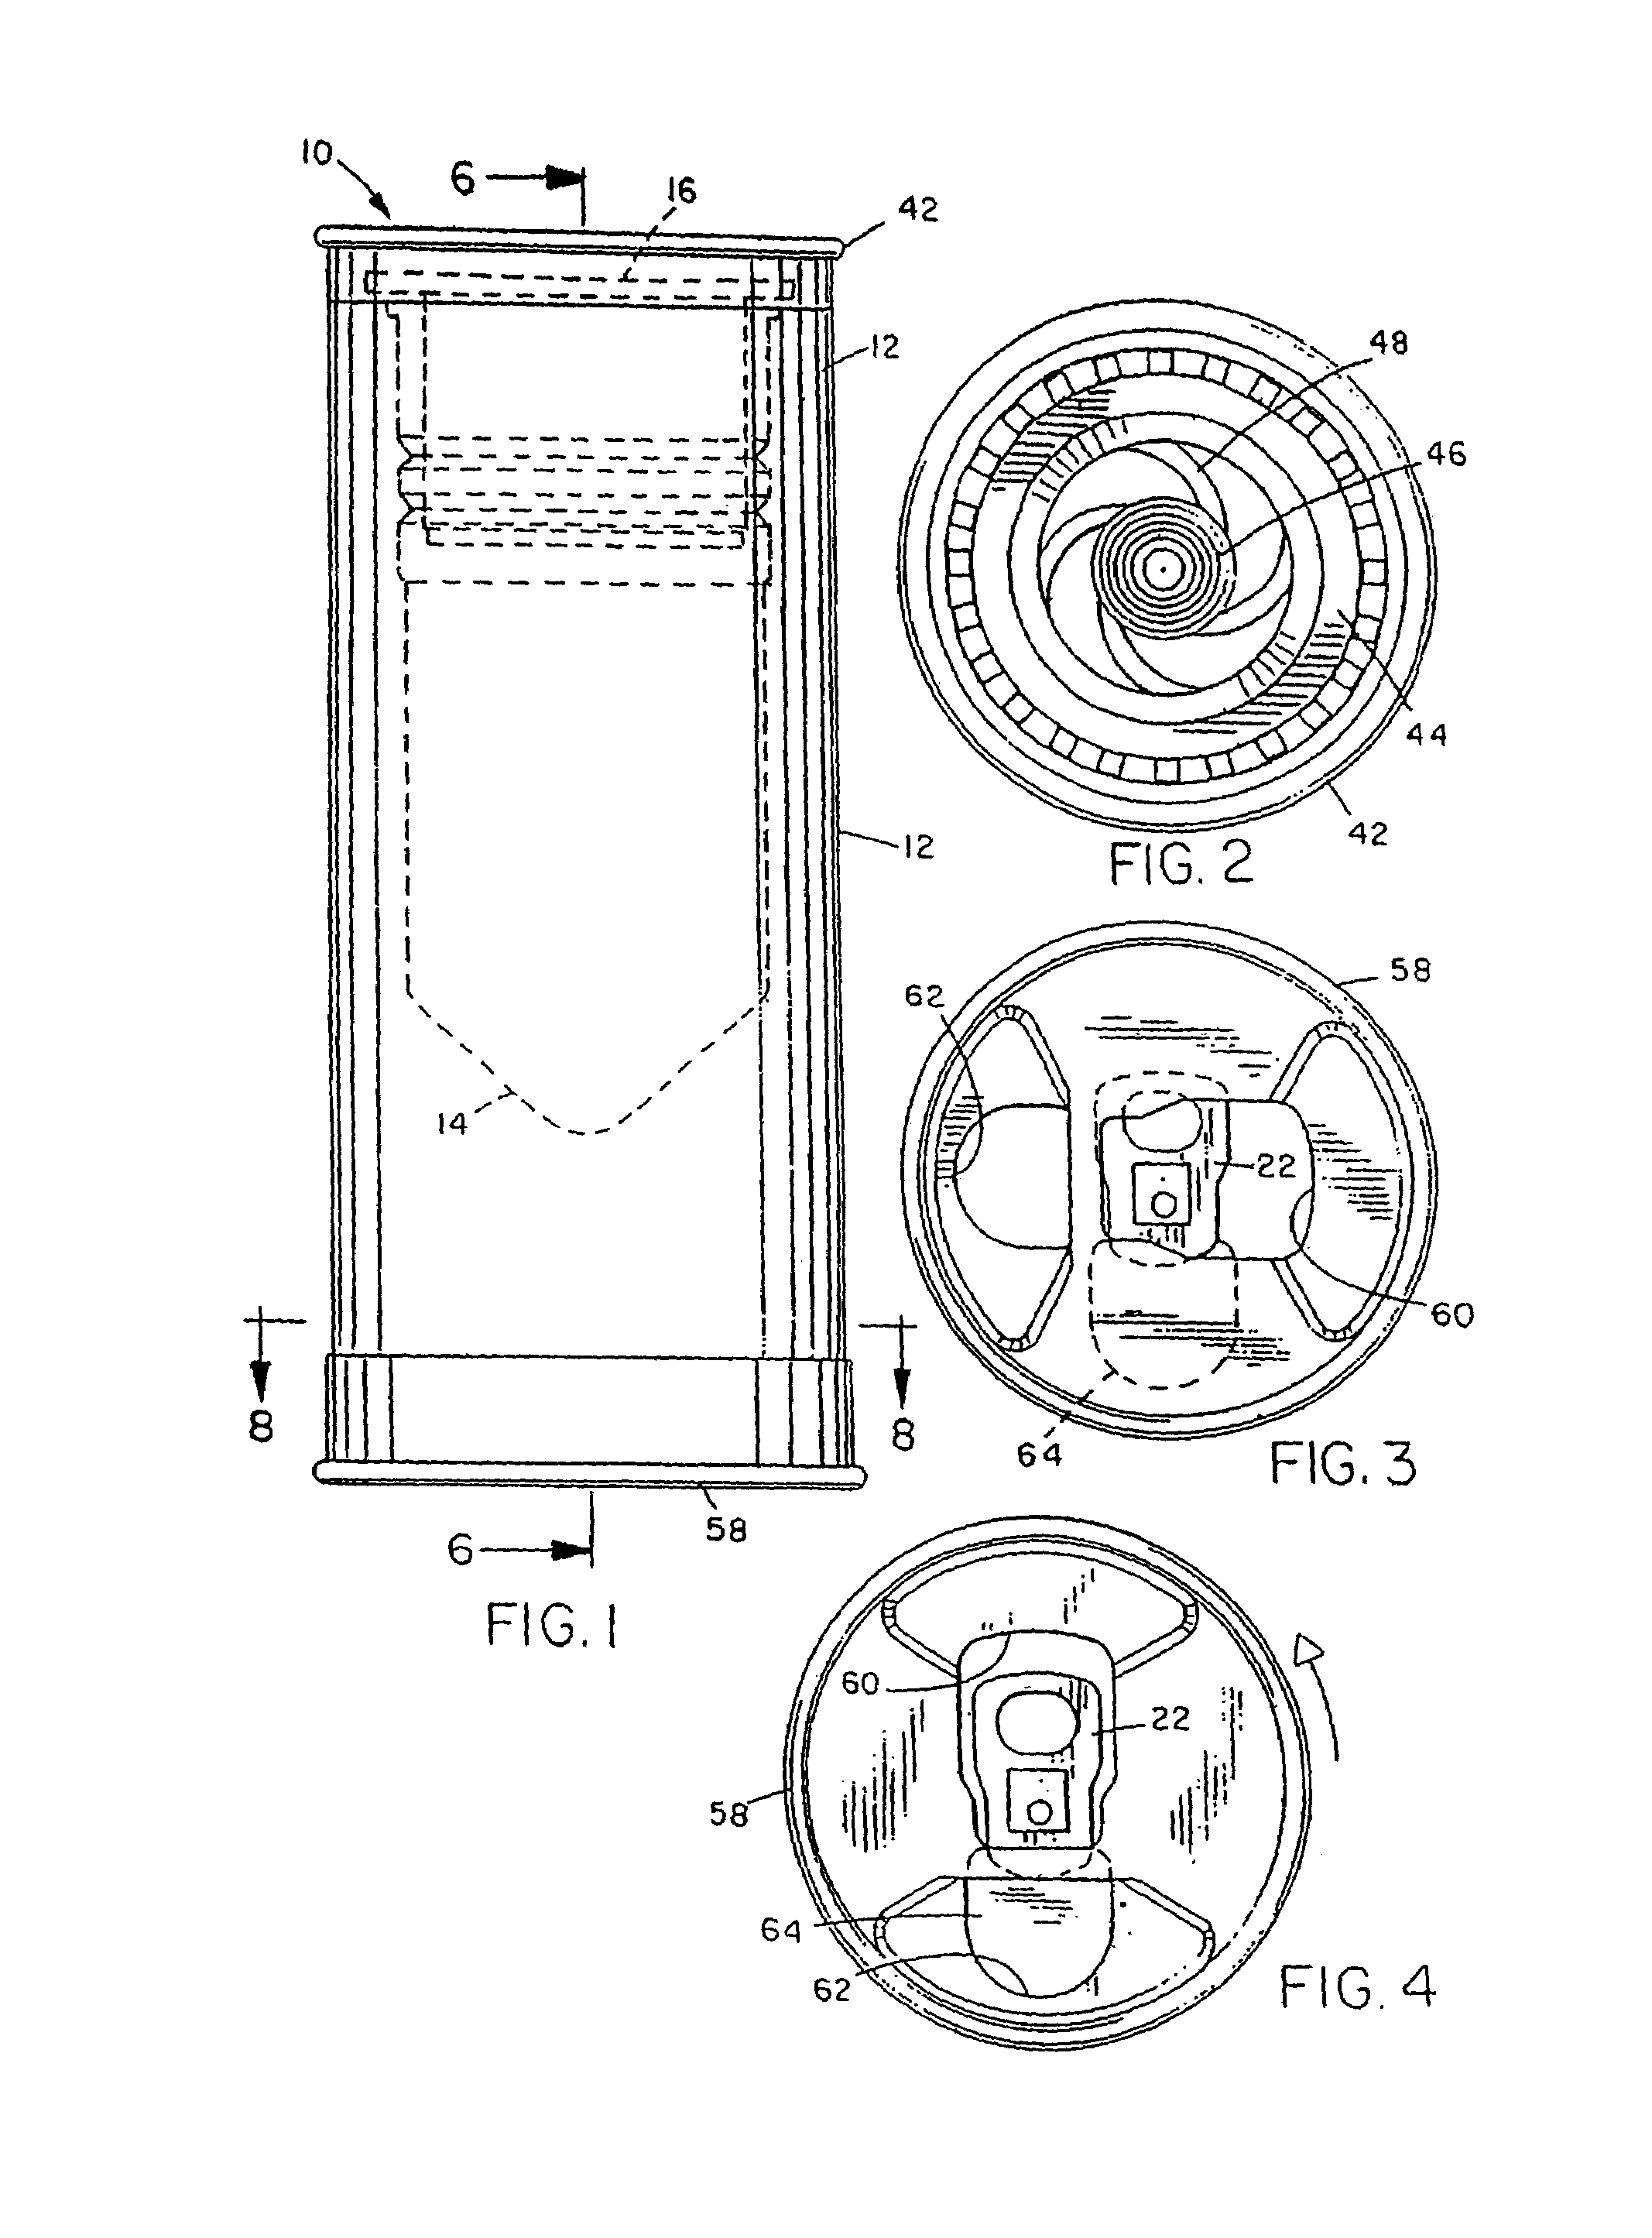 Container with integral module for heating or cooling the contents